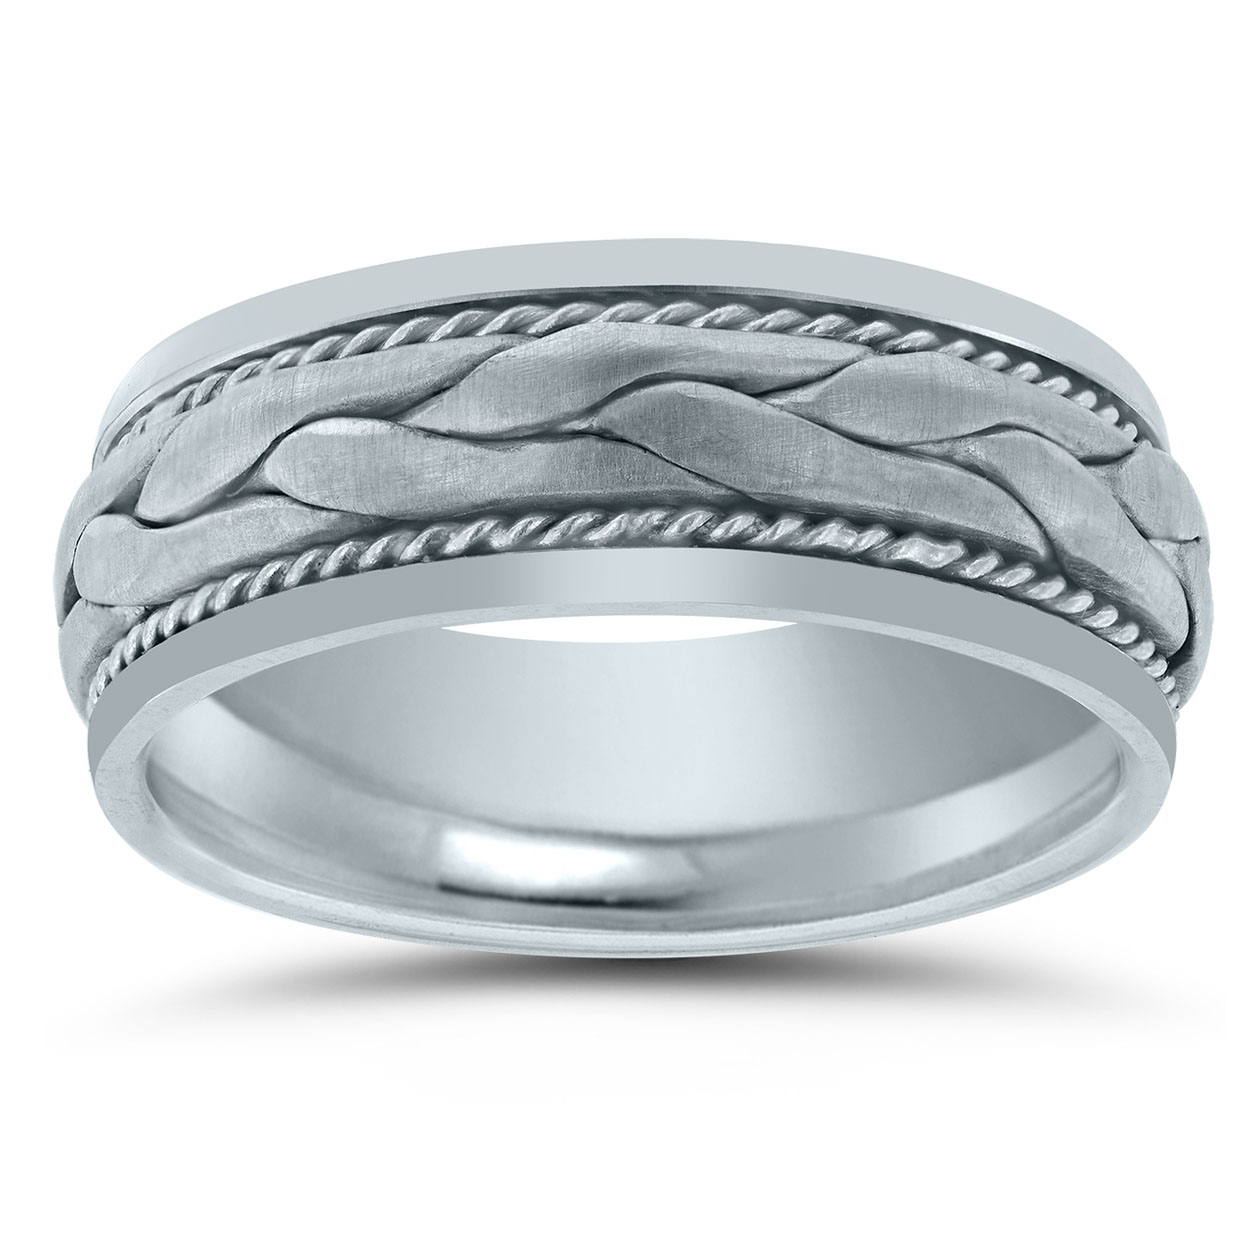 San Antonio wedding band - available at Diamonds Direct - made by Novell.